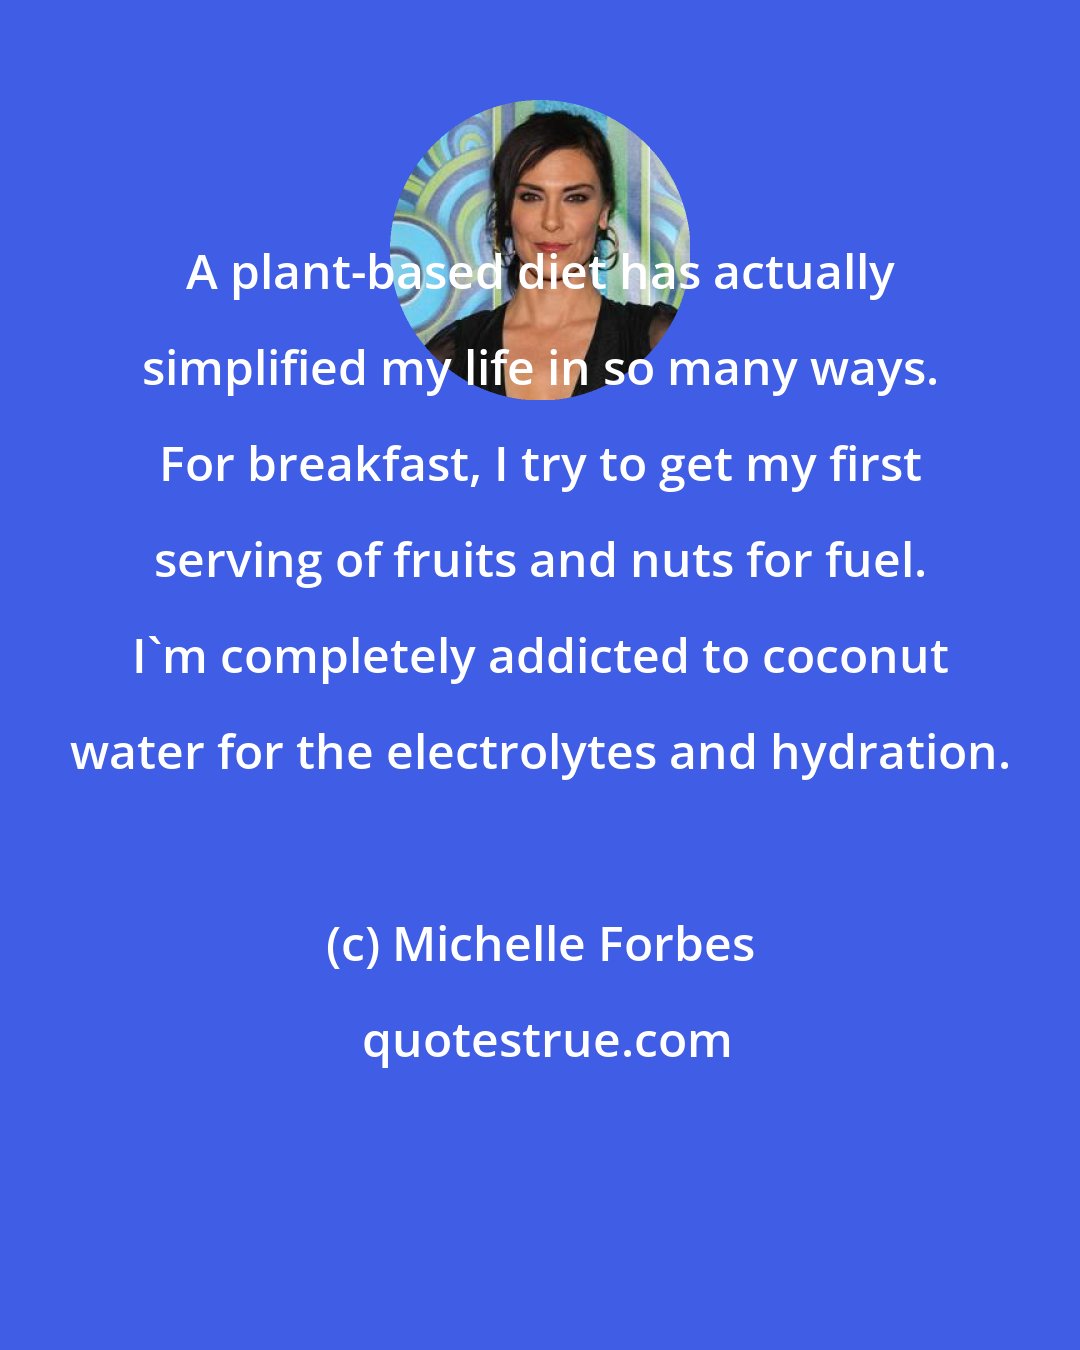 Michelle Forbes: A plant-based diet has actually simplified my life in so many ways. For breakfast, I try to get my first serving of fruits and nuts for fuel. I'm completely addicted to coconut water for the electrolytes and hydration.